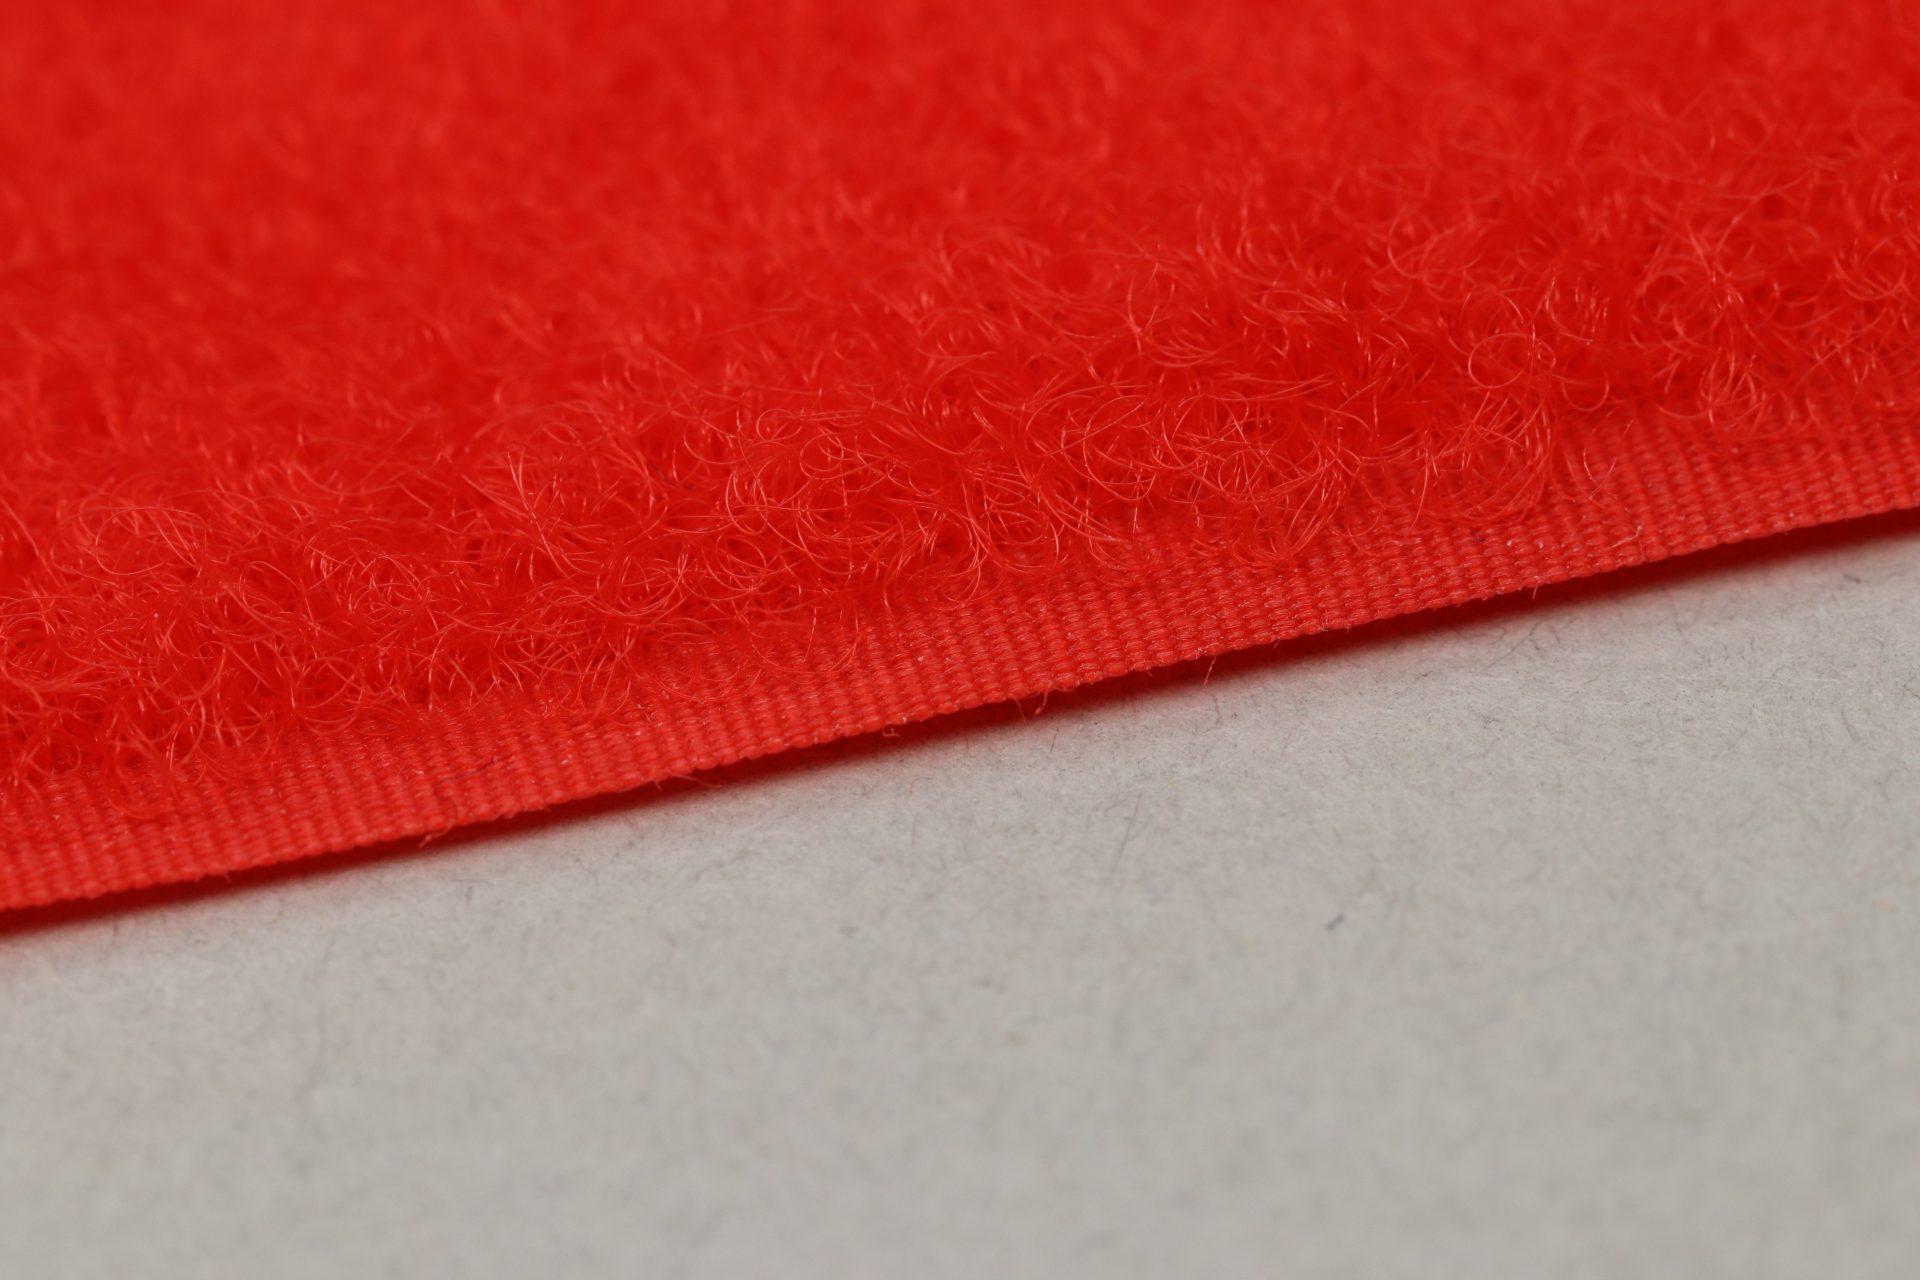 VELCRO® Brand PS14 Stick-on 100mm tape RED LOOP